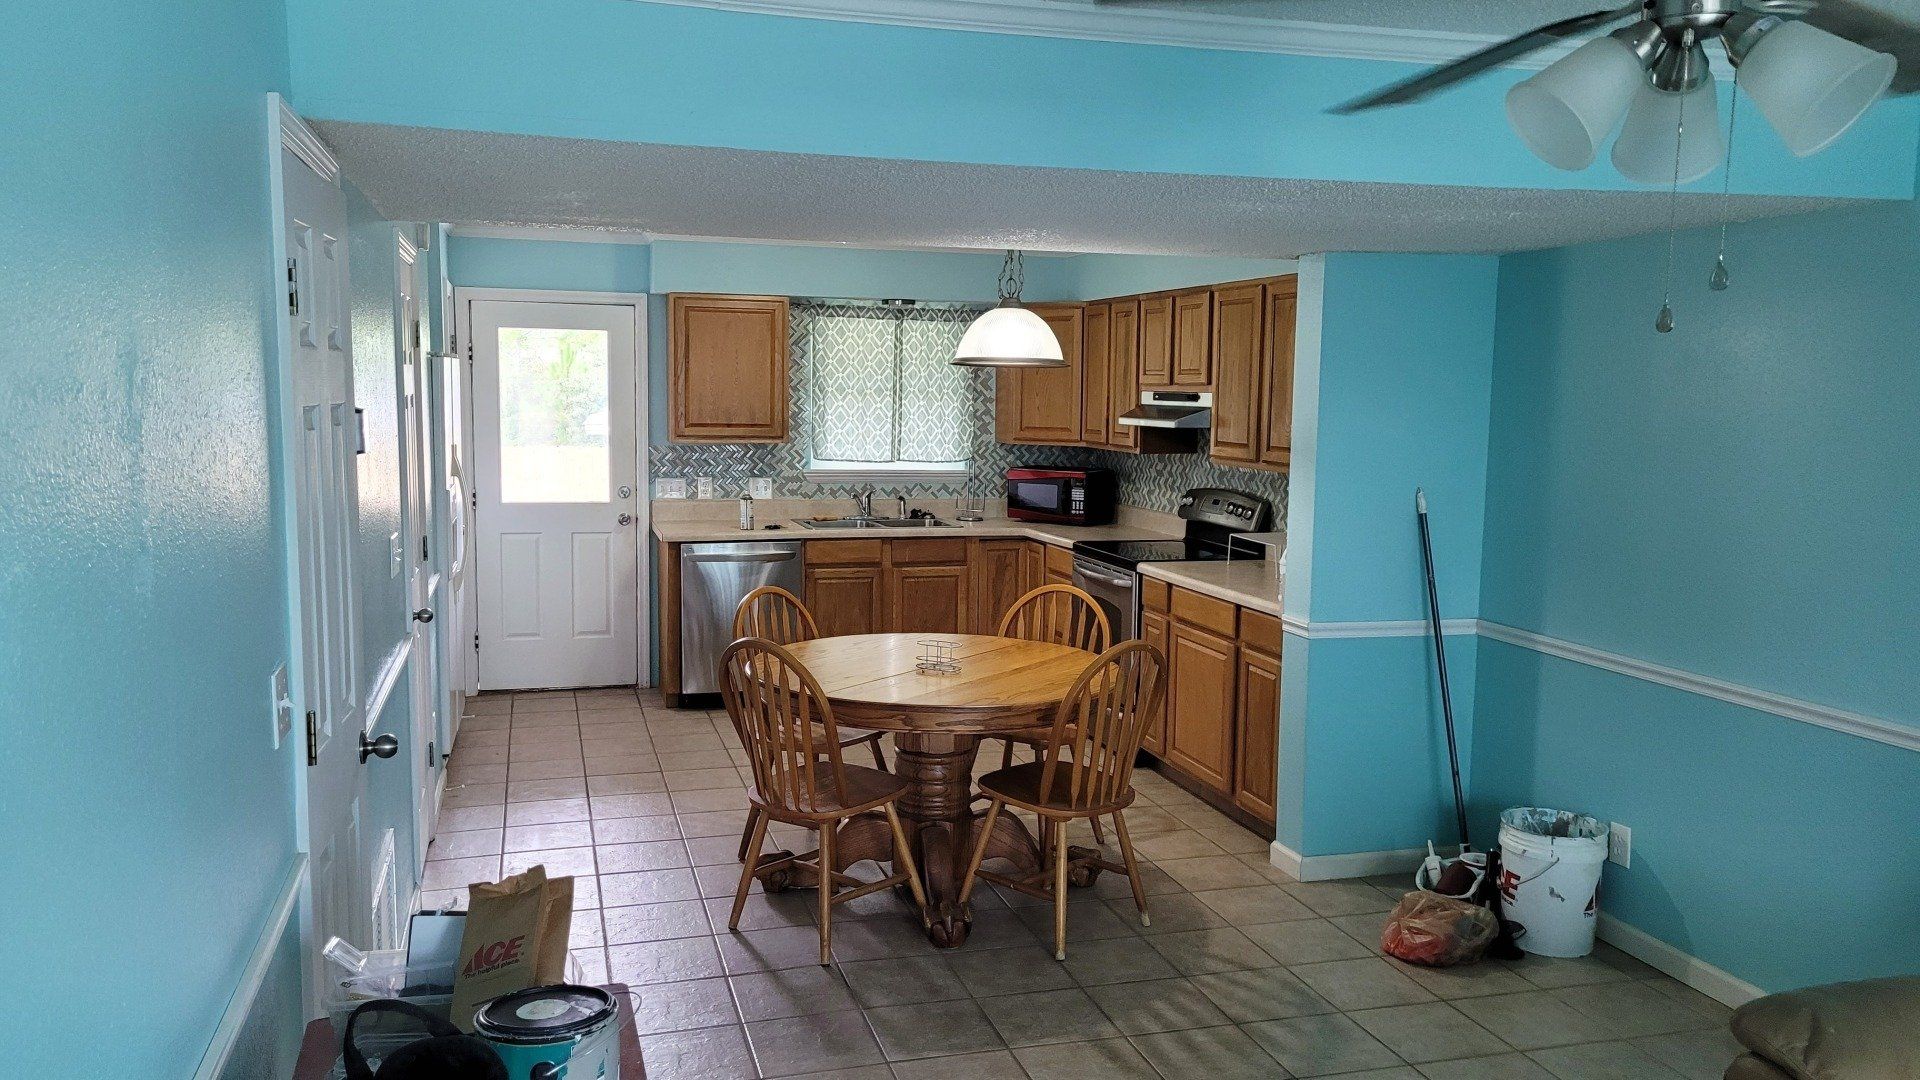 kitchen with blue walls